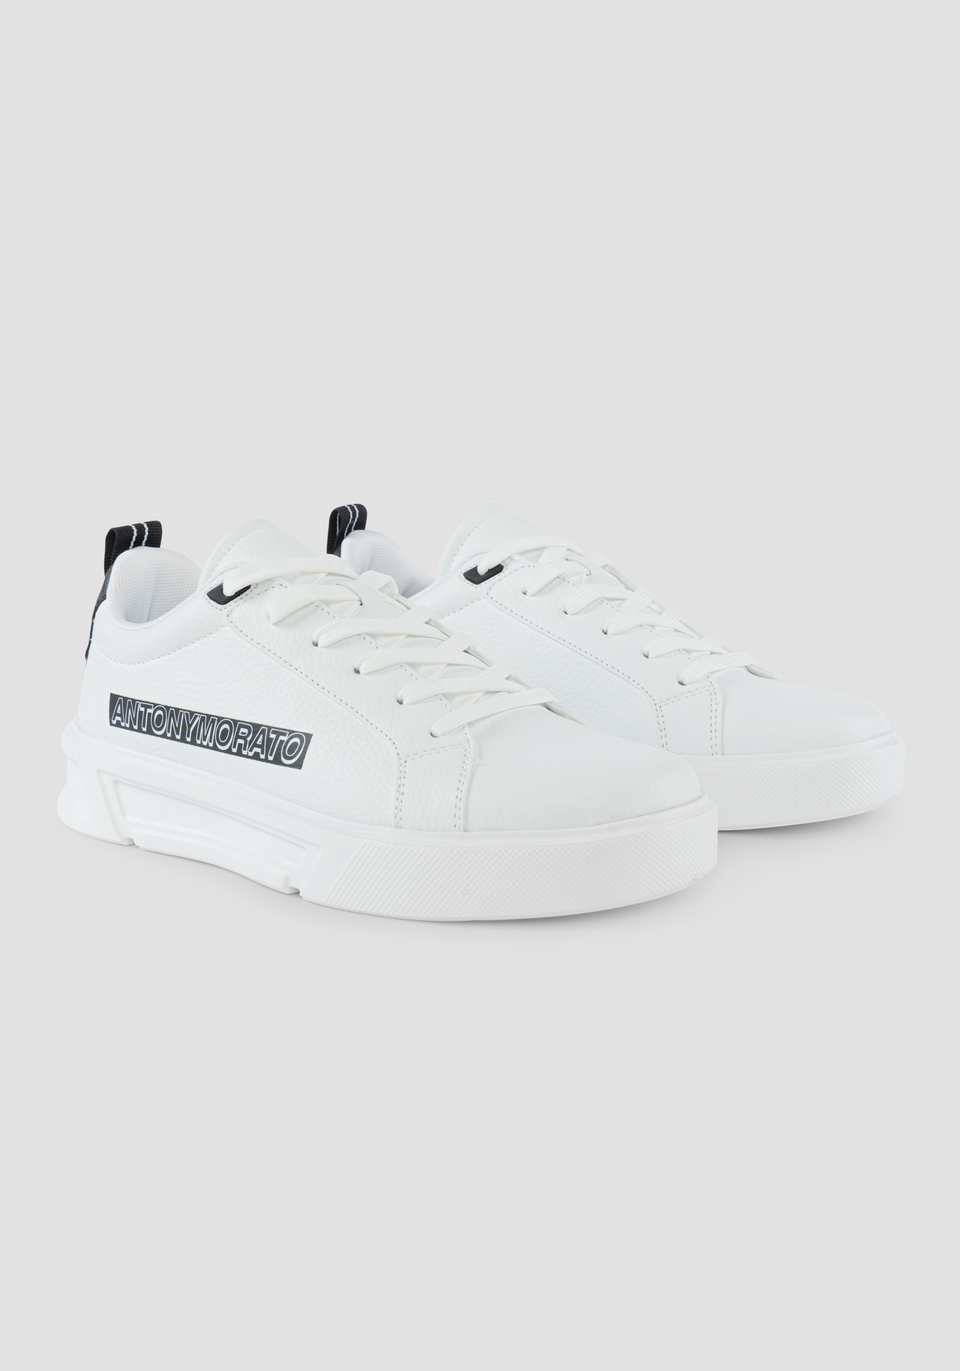 "STAGE" LOW-TOP SNEAKERS IN TUMBLED FAUX LEATHER WITH CONTRASTING LOGO AND ERGONOMIC SOLE - Antony Morato Online Shop